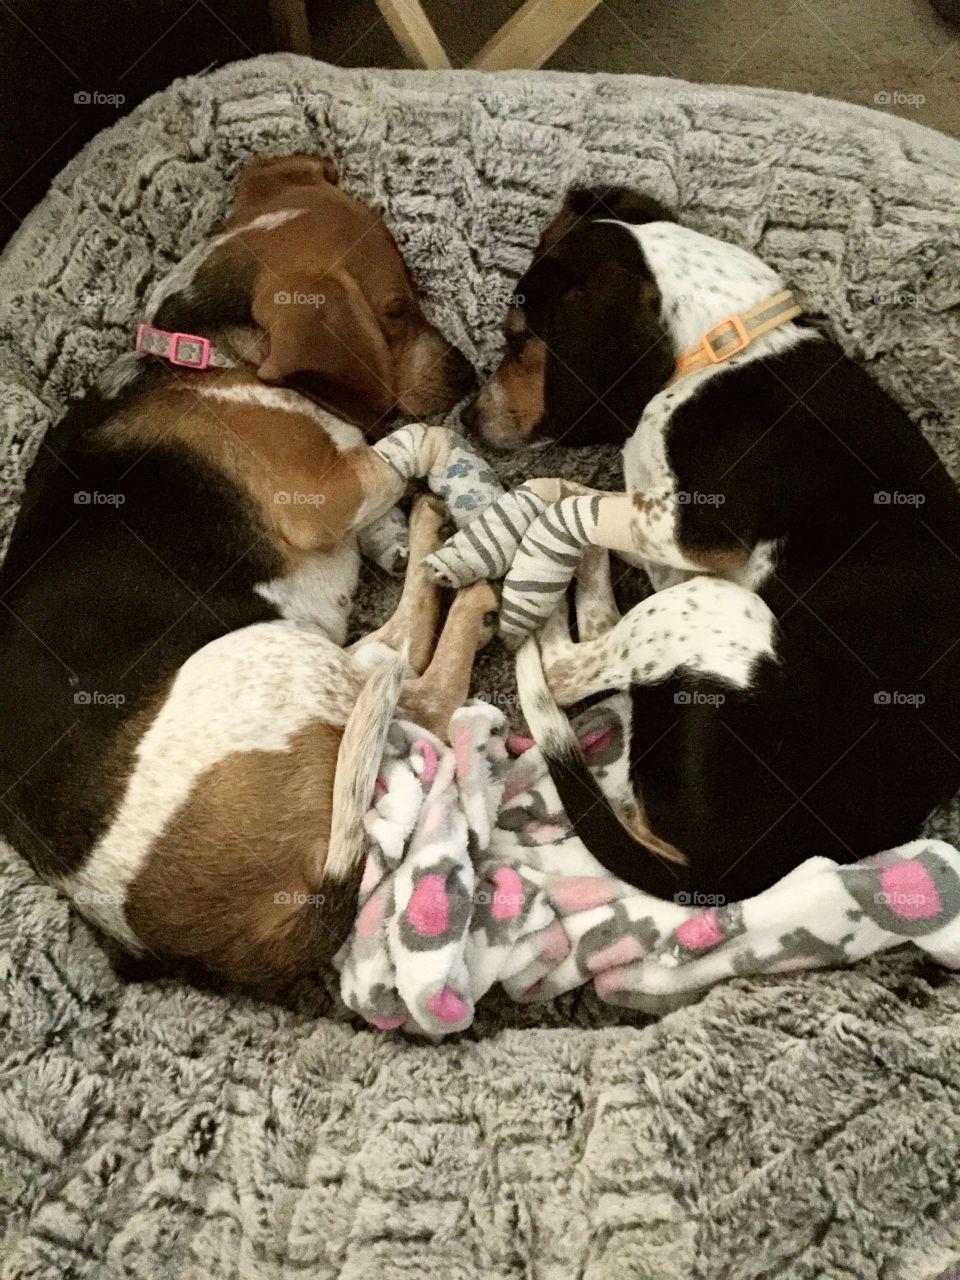 Long day after having surgery the puppy cuddling together 